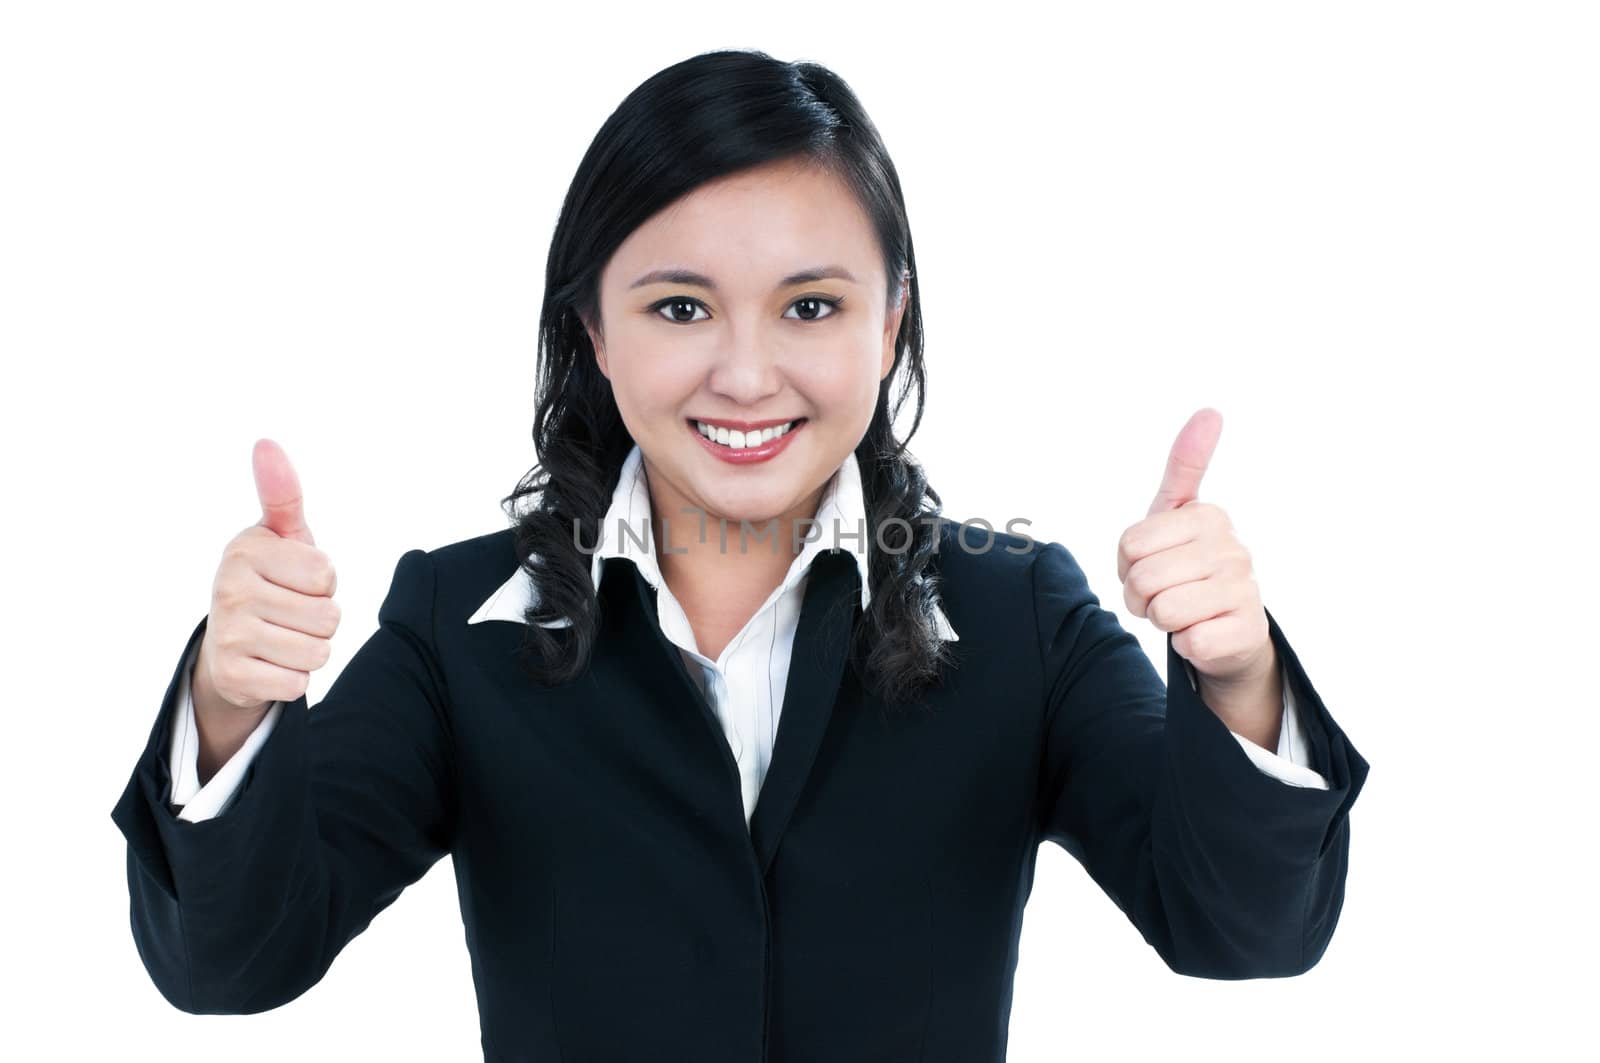 Portrait of an attractive businesswoman giving thumbs up sign, over white background.